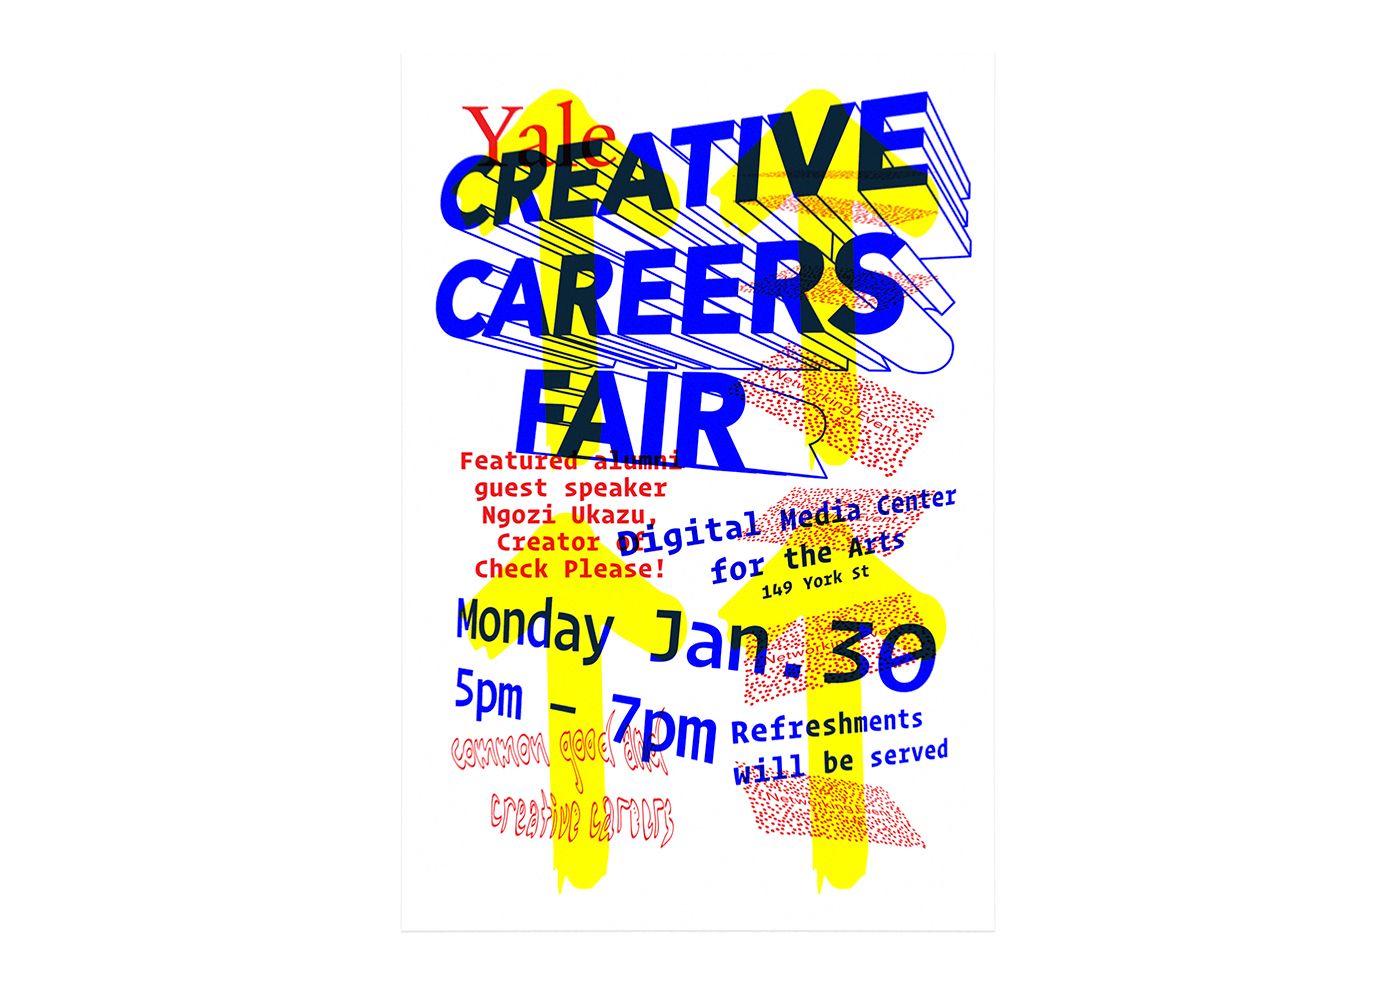 Creative poster design with red, yellow, and blue overprint, arrows, hand writing, and typography for the Yale Creative Careers Fair at the Yale Digital Media Center for the Arts.